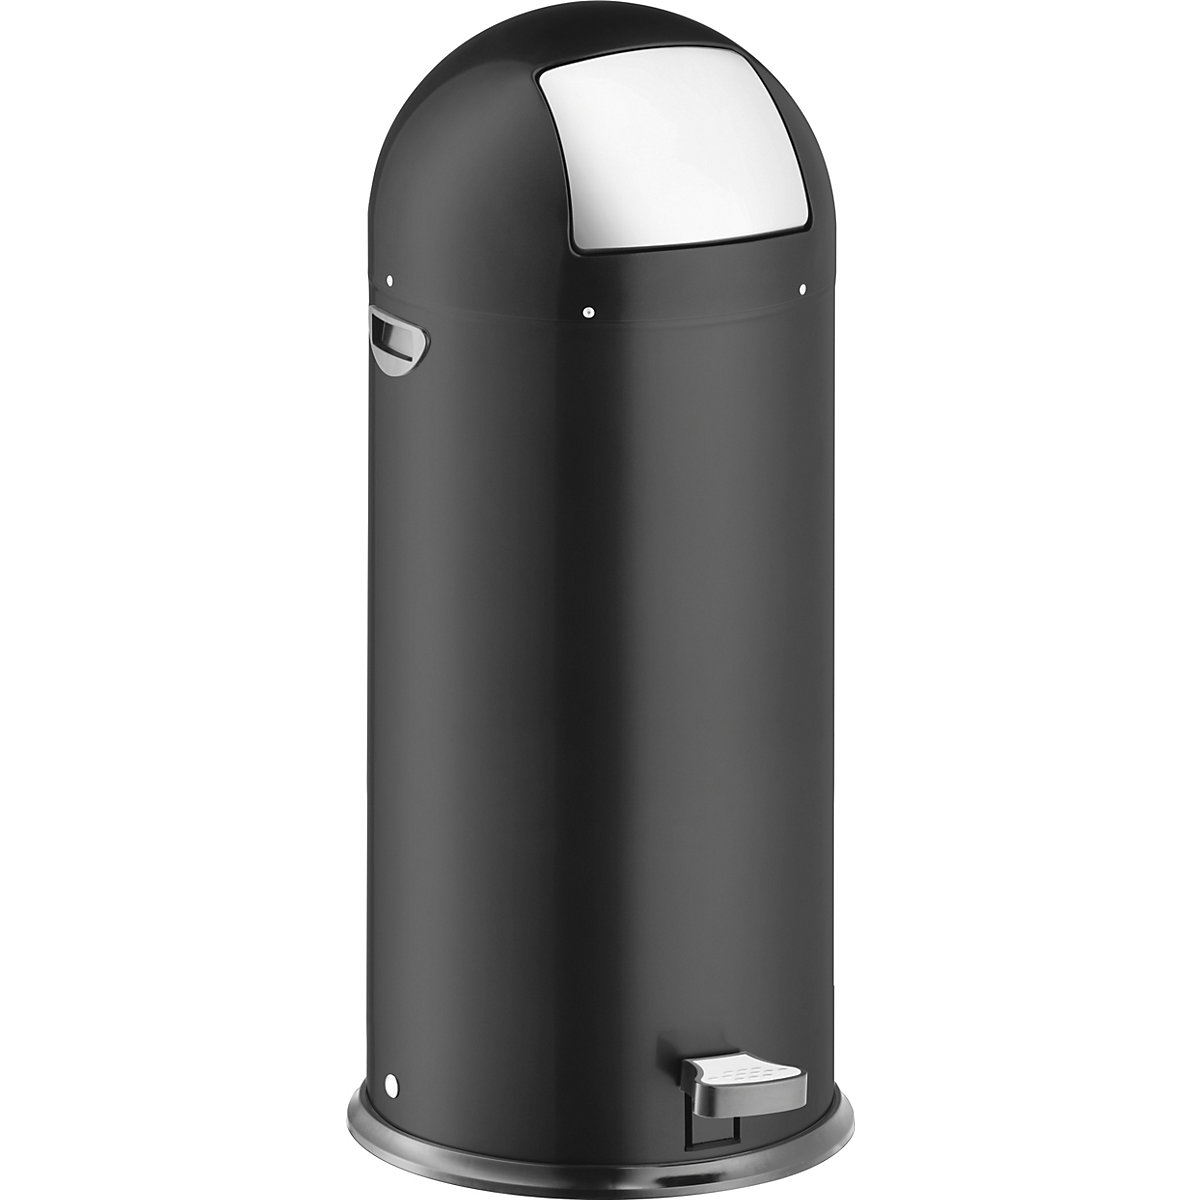 Push waste bin with pedal – helit